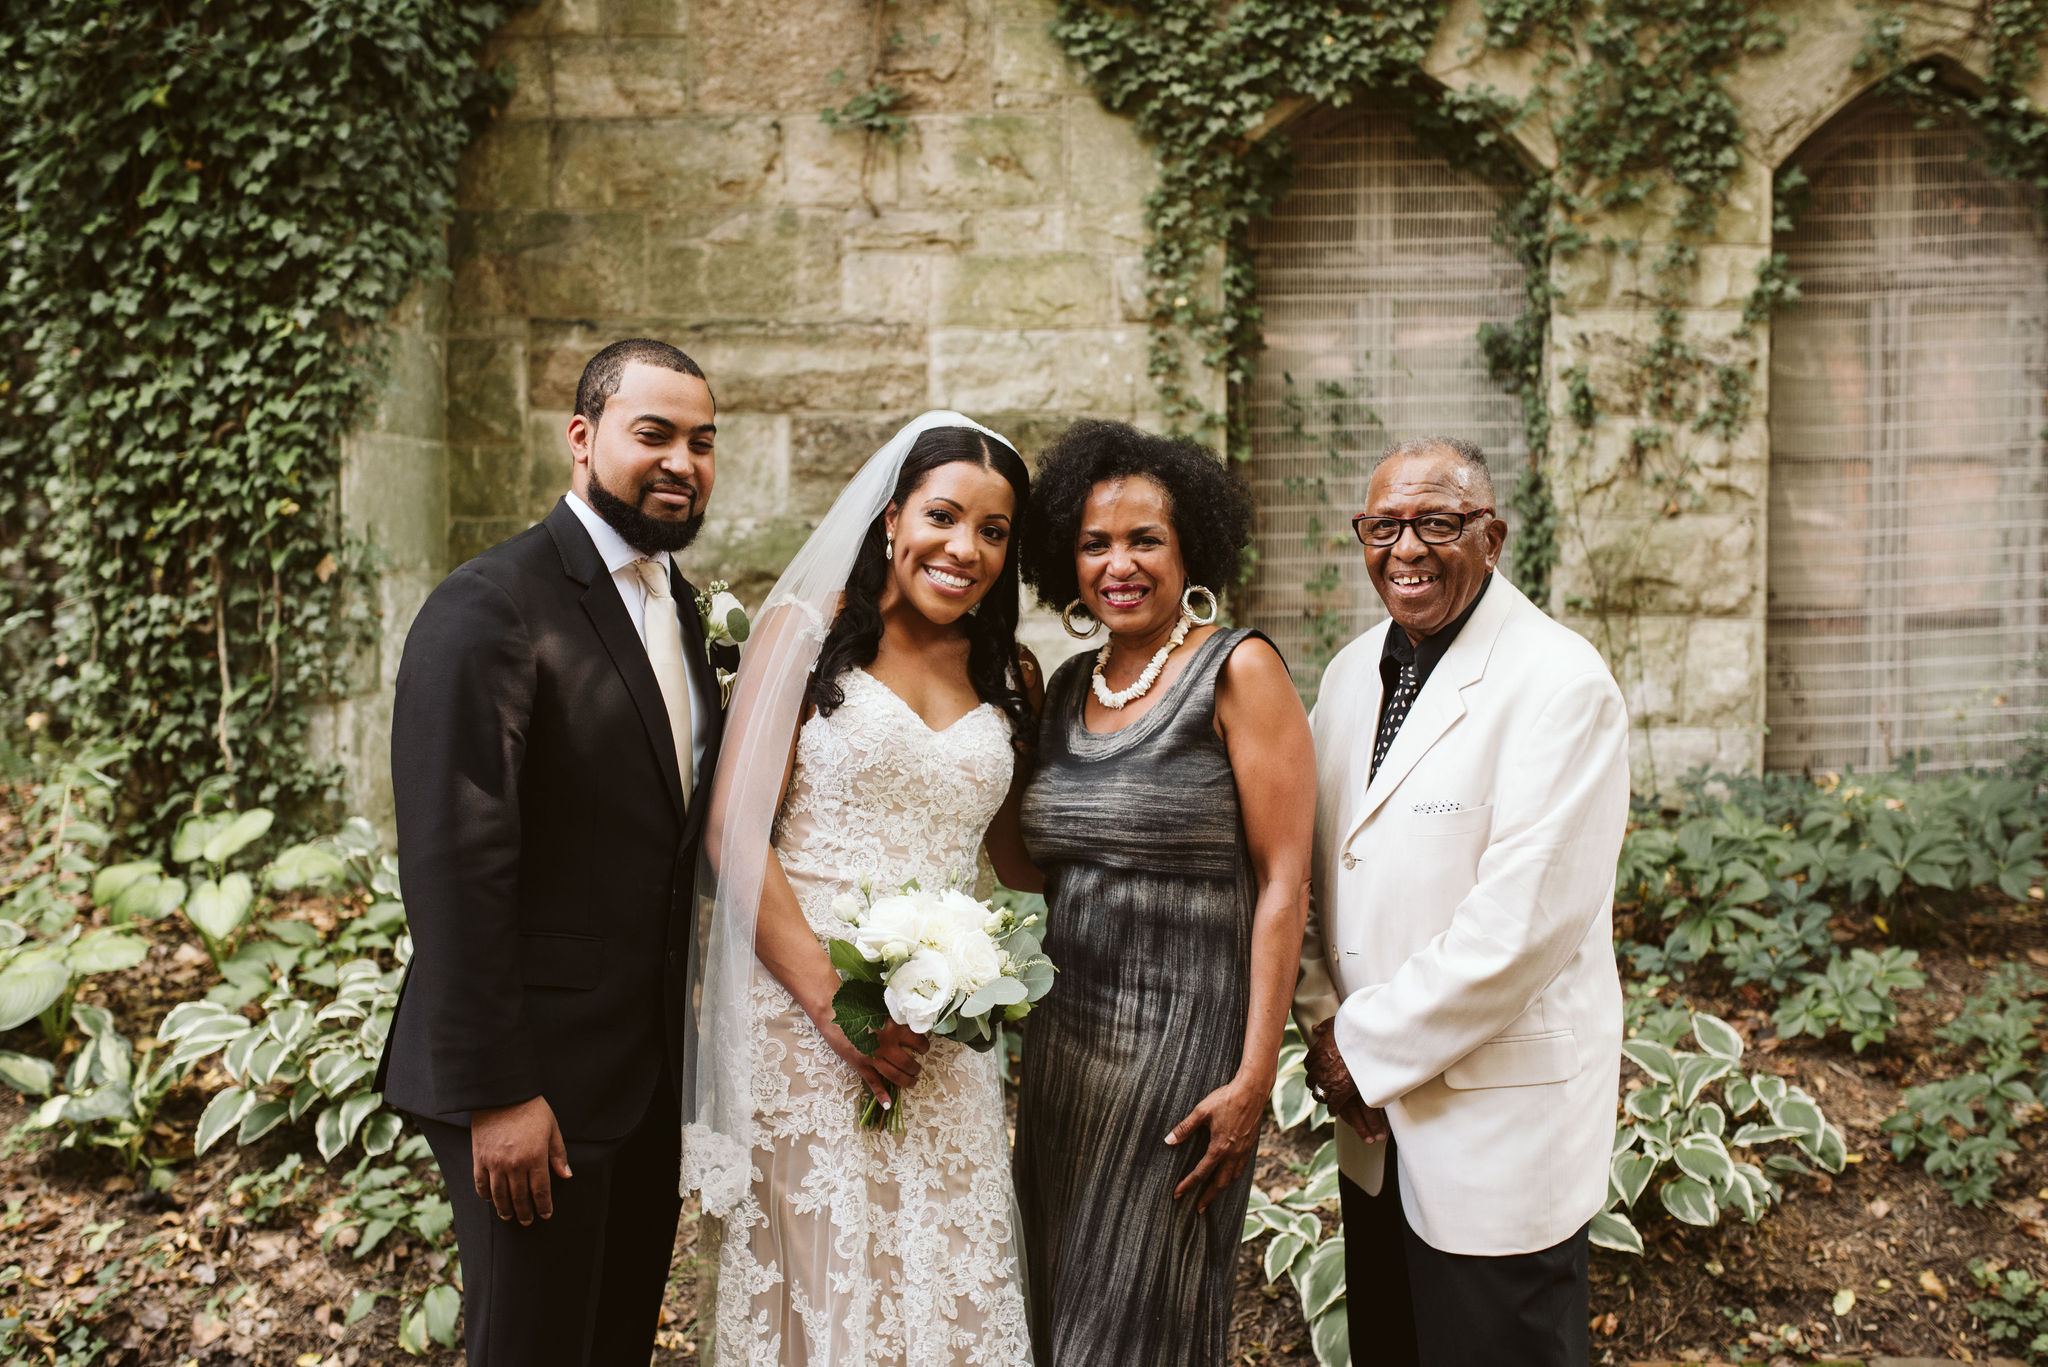  Baltimore, Maryland Wedding Photographer, Mount Vernon, Chase Court, Classic, Outdoor Ceremony, Garden, Romantic, Portrait of Bride and Groom with Family, Ivy Wall 